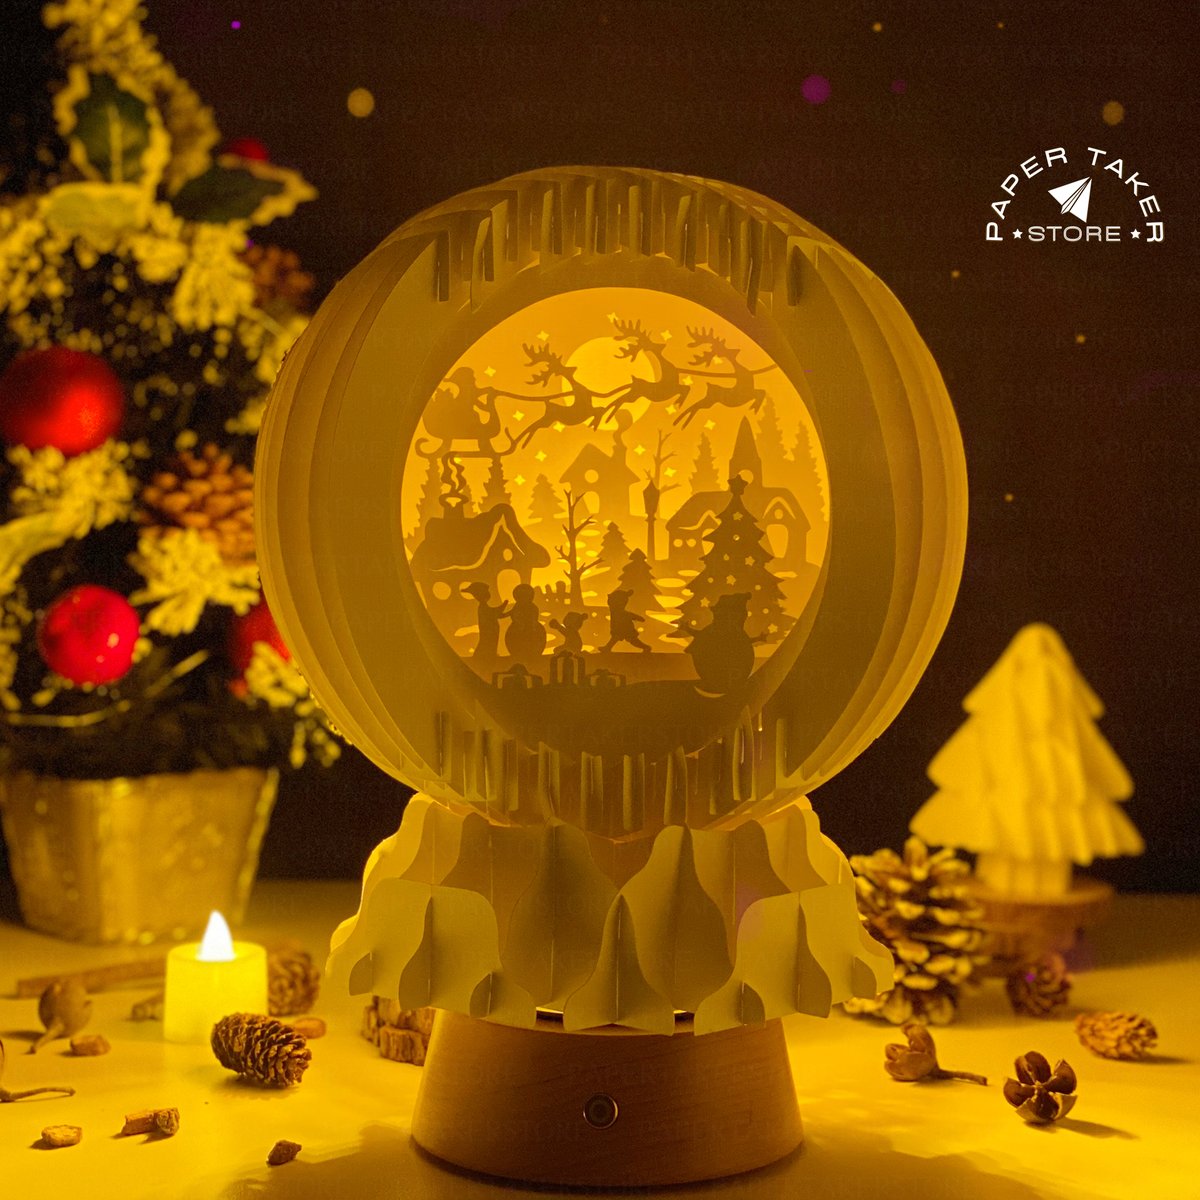 Excited to share the latest addition to my #etsy shop: Christmas 1 Pop-Up Template, Globe Pop-Up SVG for Cricut Projects, 3D Papercut Light Box Sliceform, DIY Globe Night Light etsy.me/3wmHafL #christmas #3dpopupcardsvg #silhouettestudio #svgforcricut #papercutlightbox